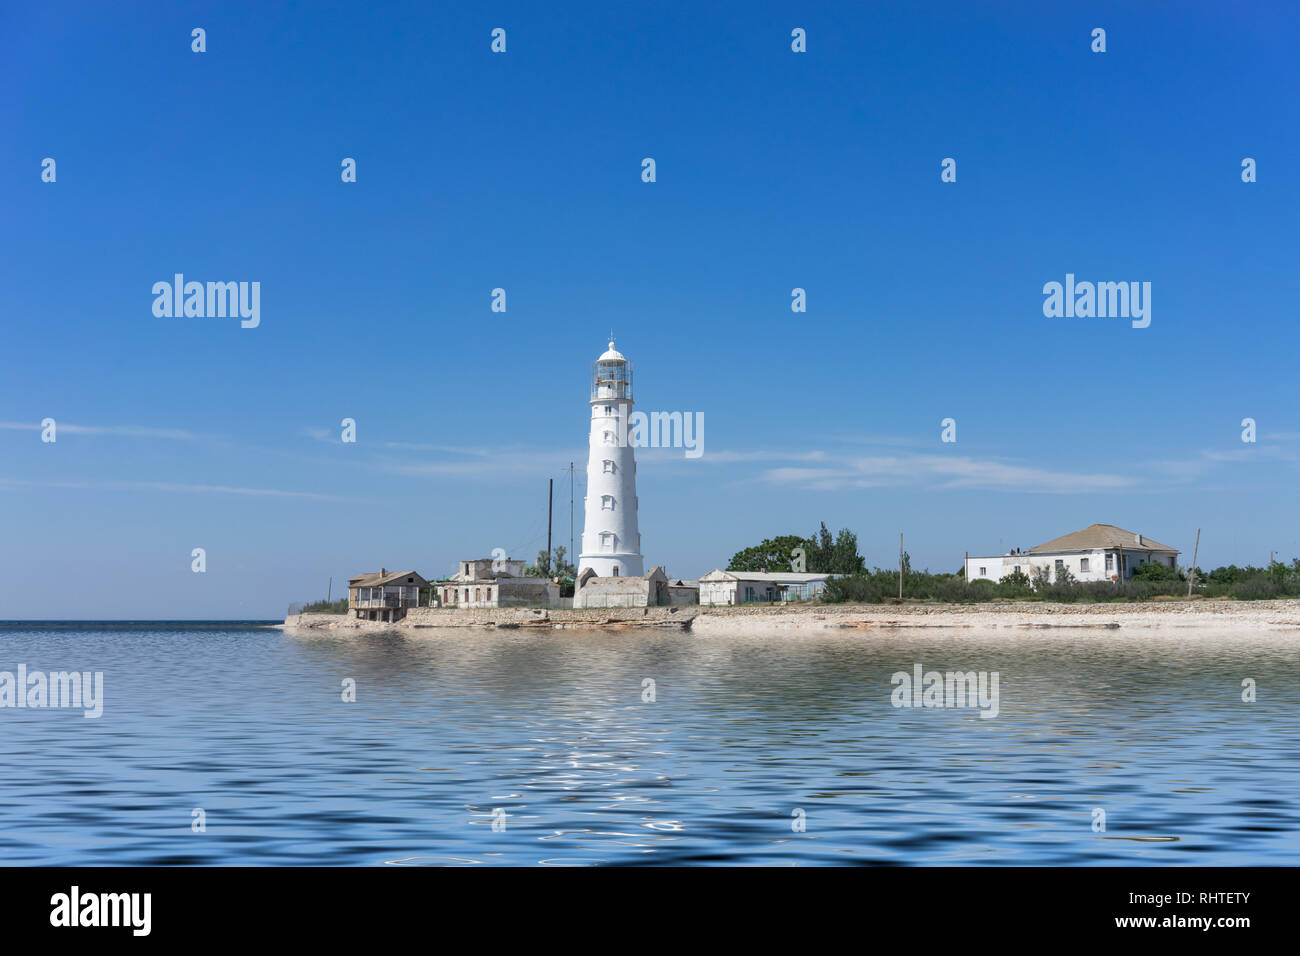 Marine landscape with views of the Cape Tarhankut and the white Stock Photo